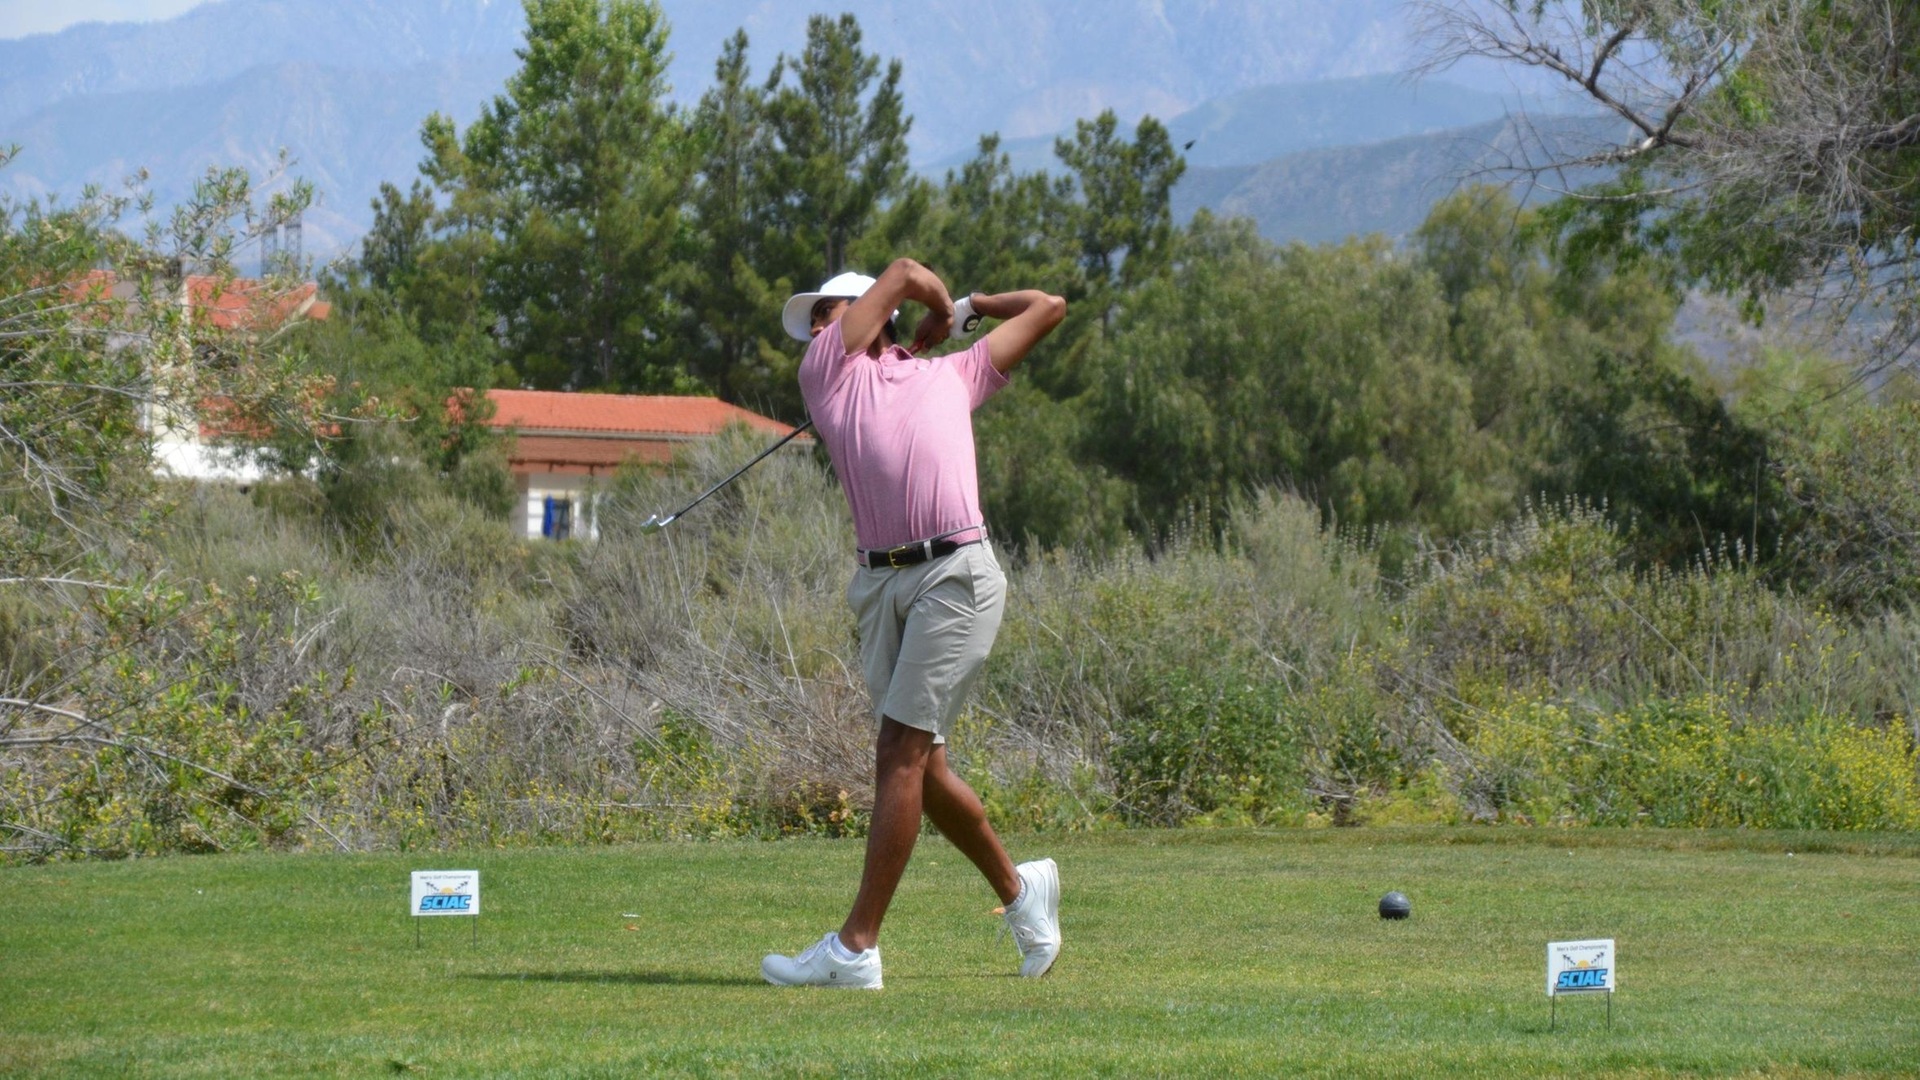 Vikram Chatterjee finished as the only player under par